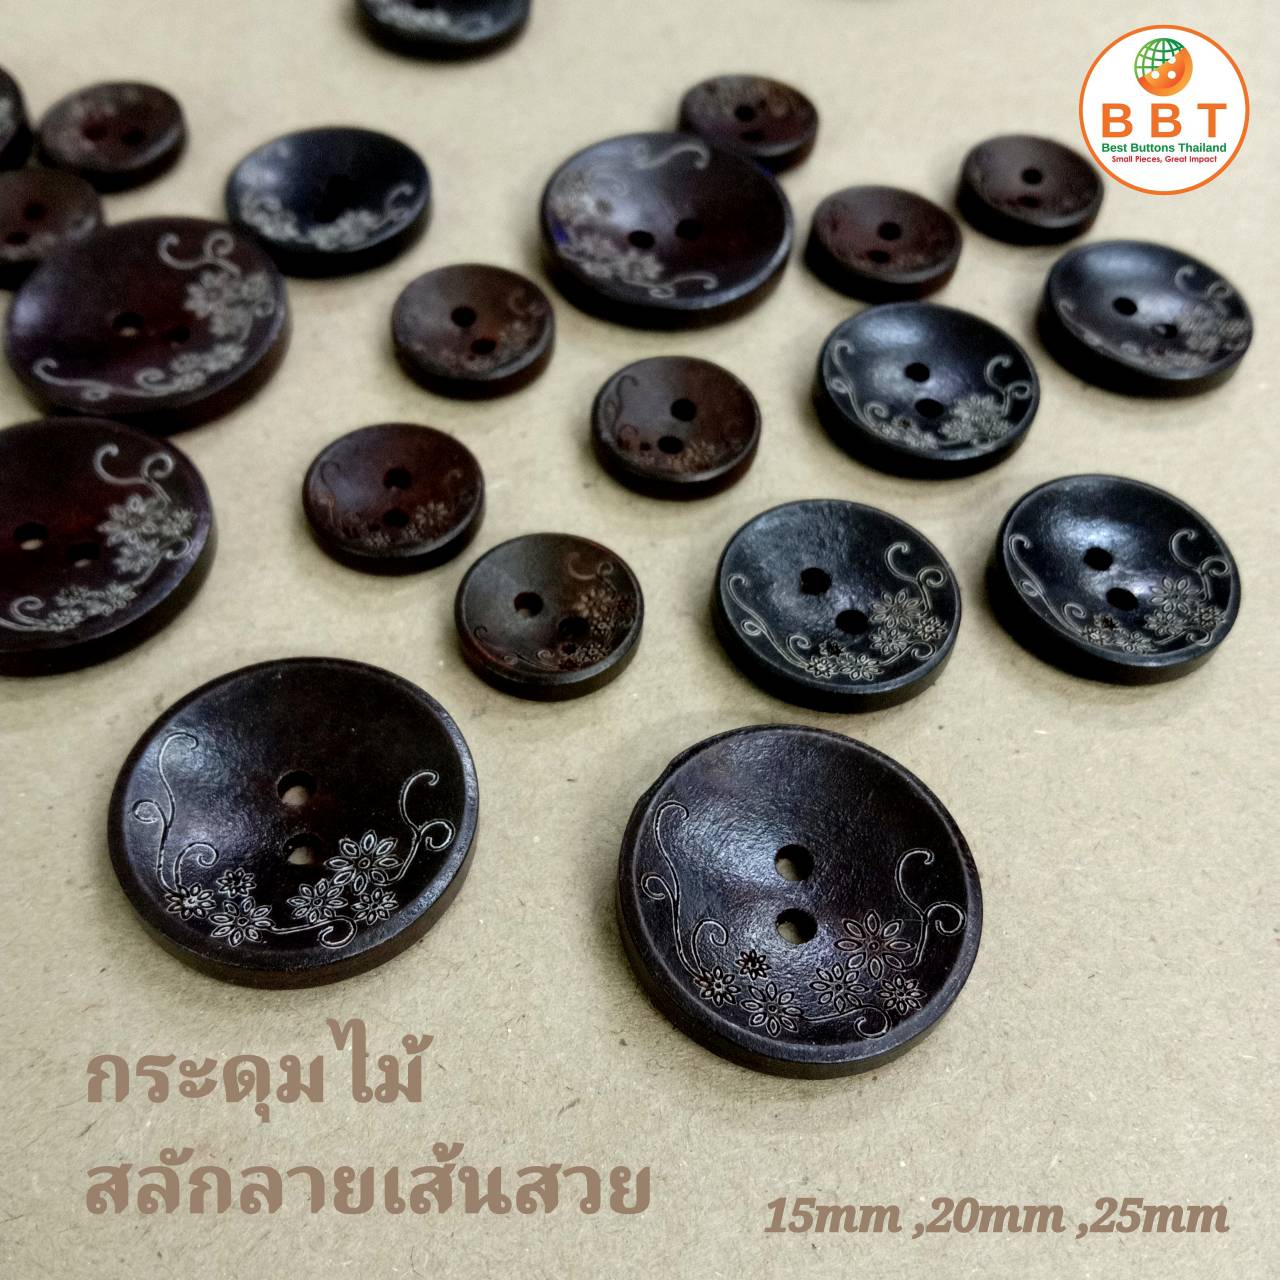 Engraved Wood Buttons